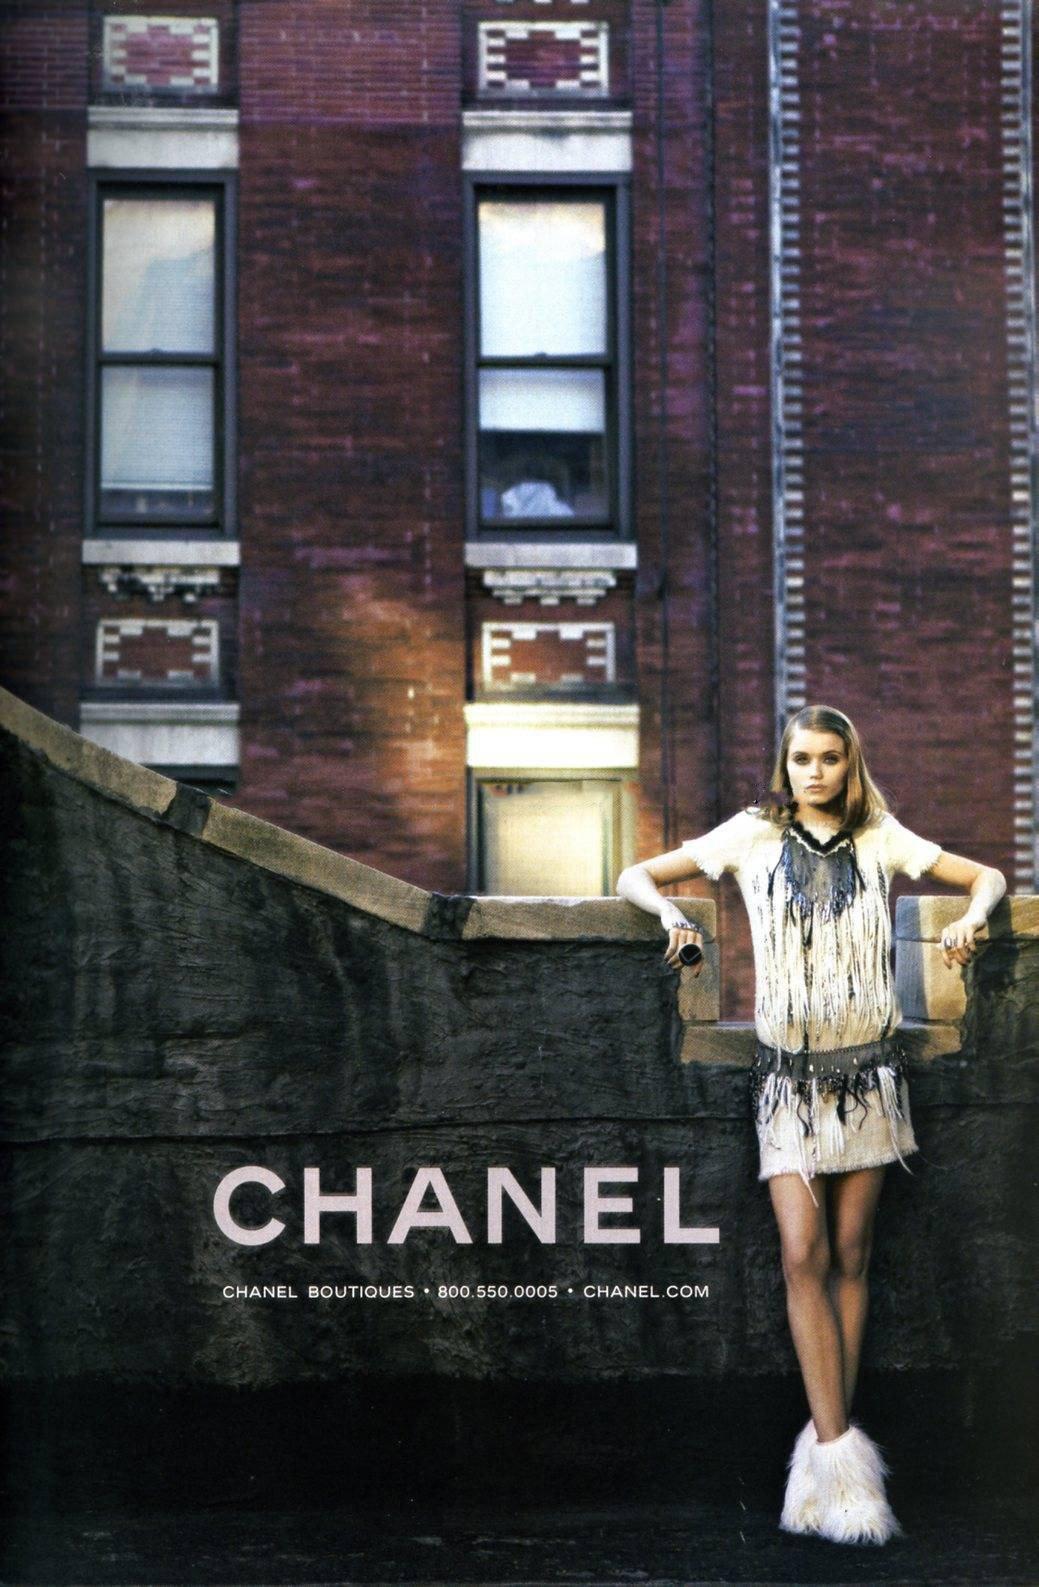 Famous Chanel ecru tweed dress with fringe detail from Ad Campaign of ARCTIC ICE Collection
As seen on many celebs including Kira Knightley!
Size mark 38 FR. Only tried once.
- CC logo charm at waist
- tonal silk lining